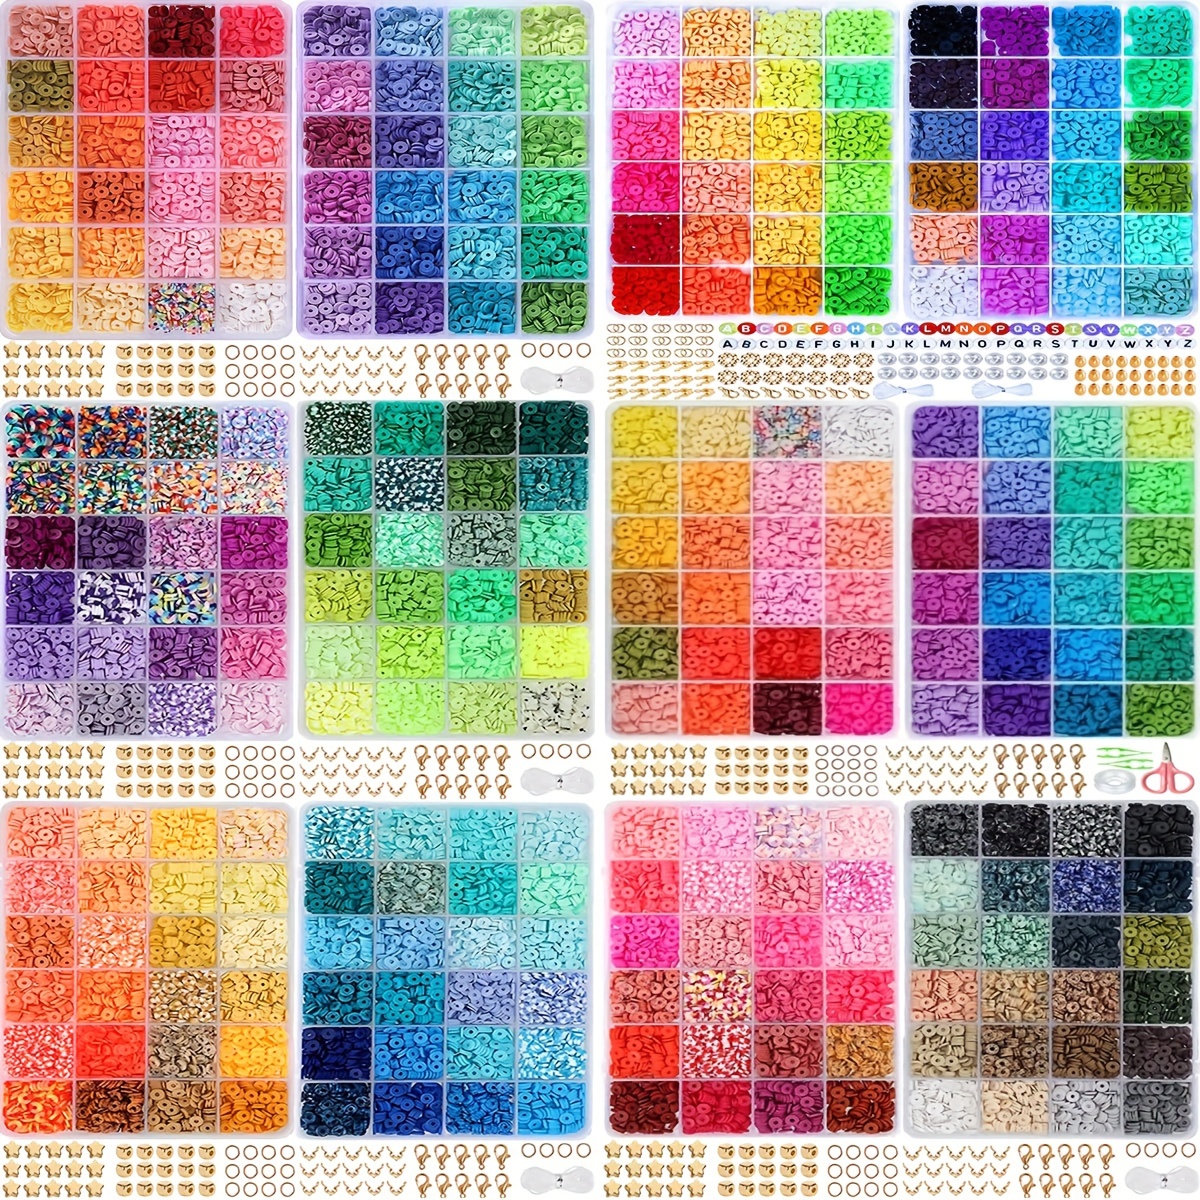 

5400pcs 48 Colors Flat Round Polymer Clay Spacer Beads For Jewelry Making Diy Fashion Bracelet Necklace Halloween Thanksgiving Christmas Gift Craft Supplies